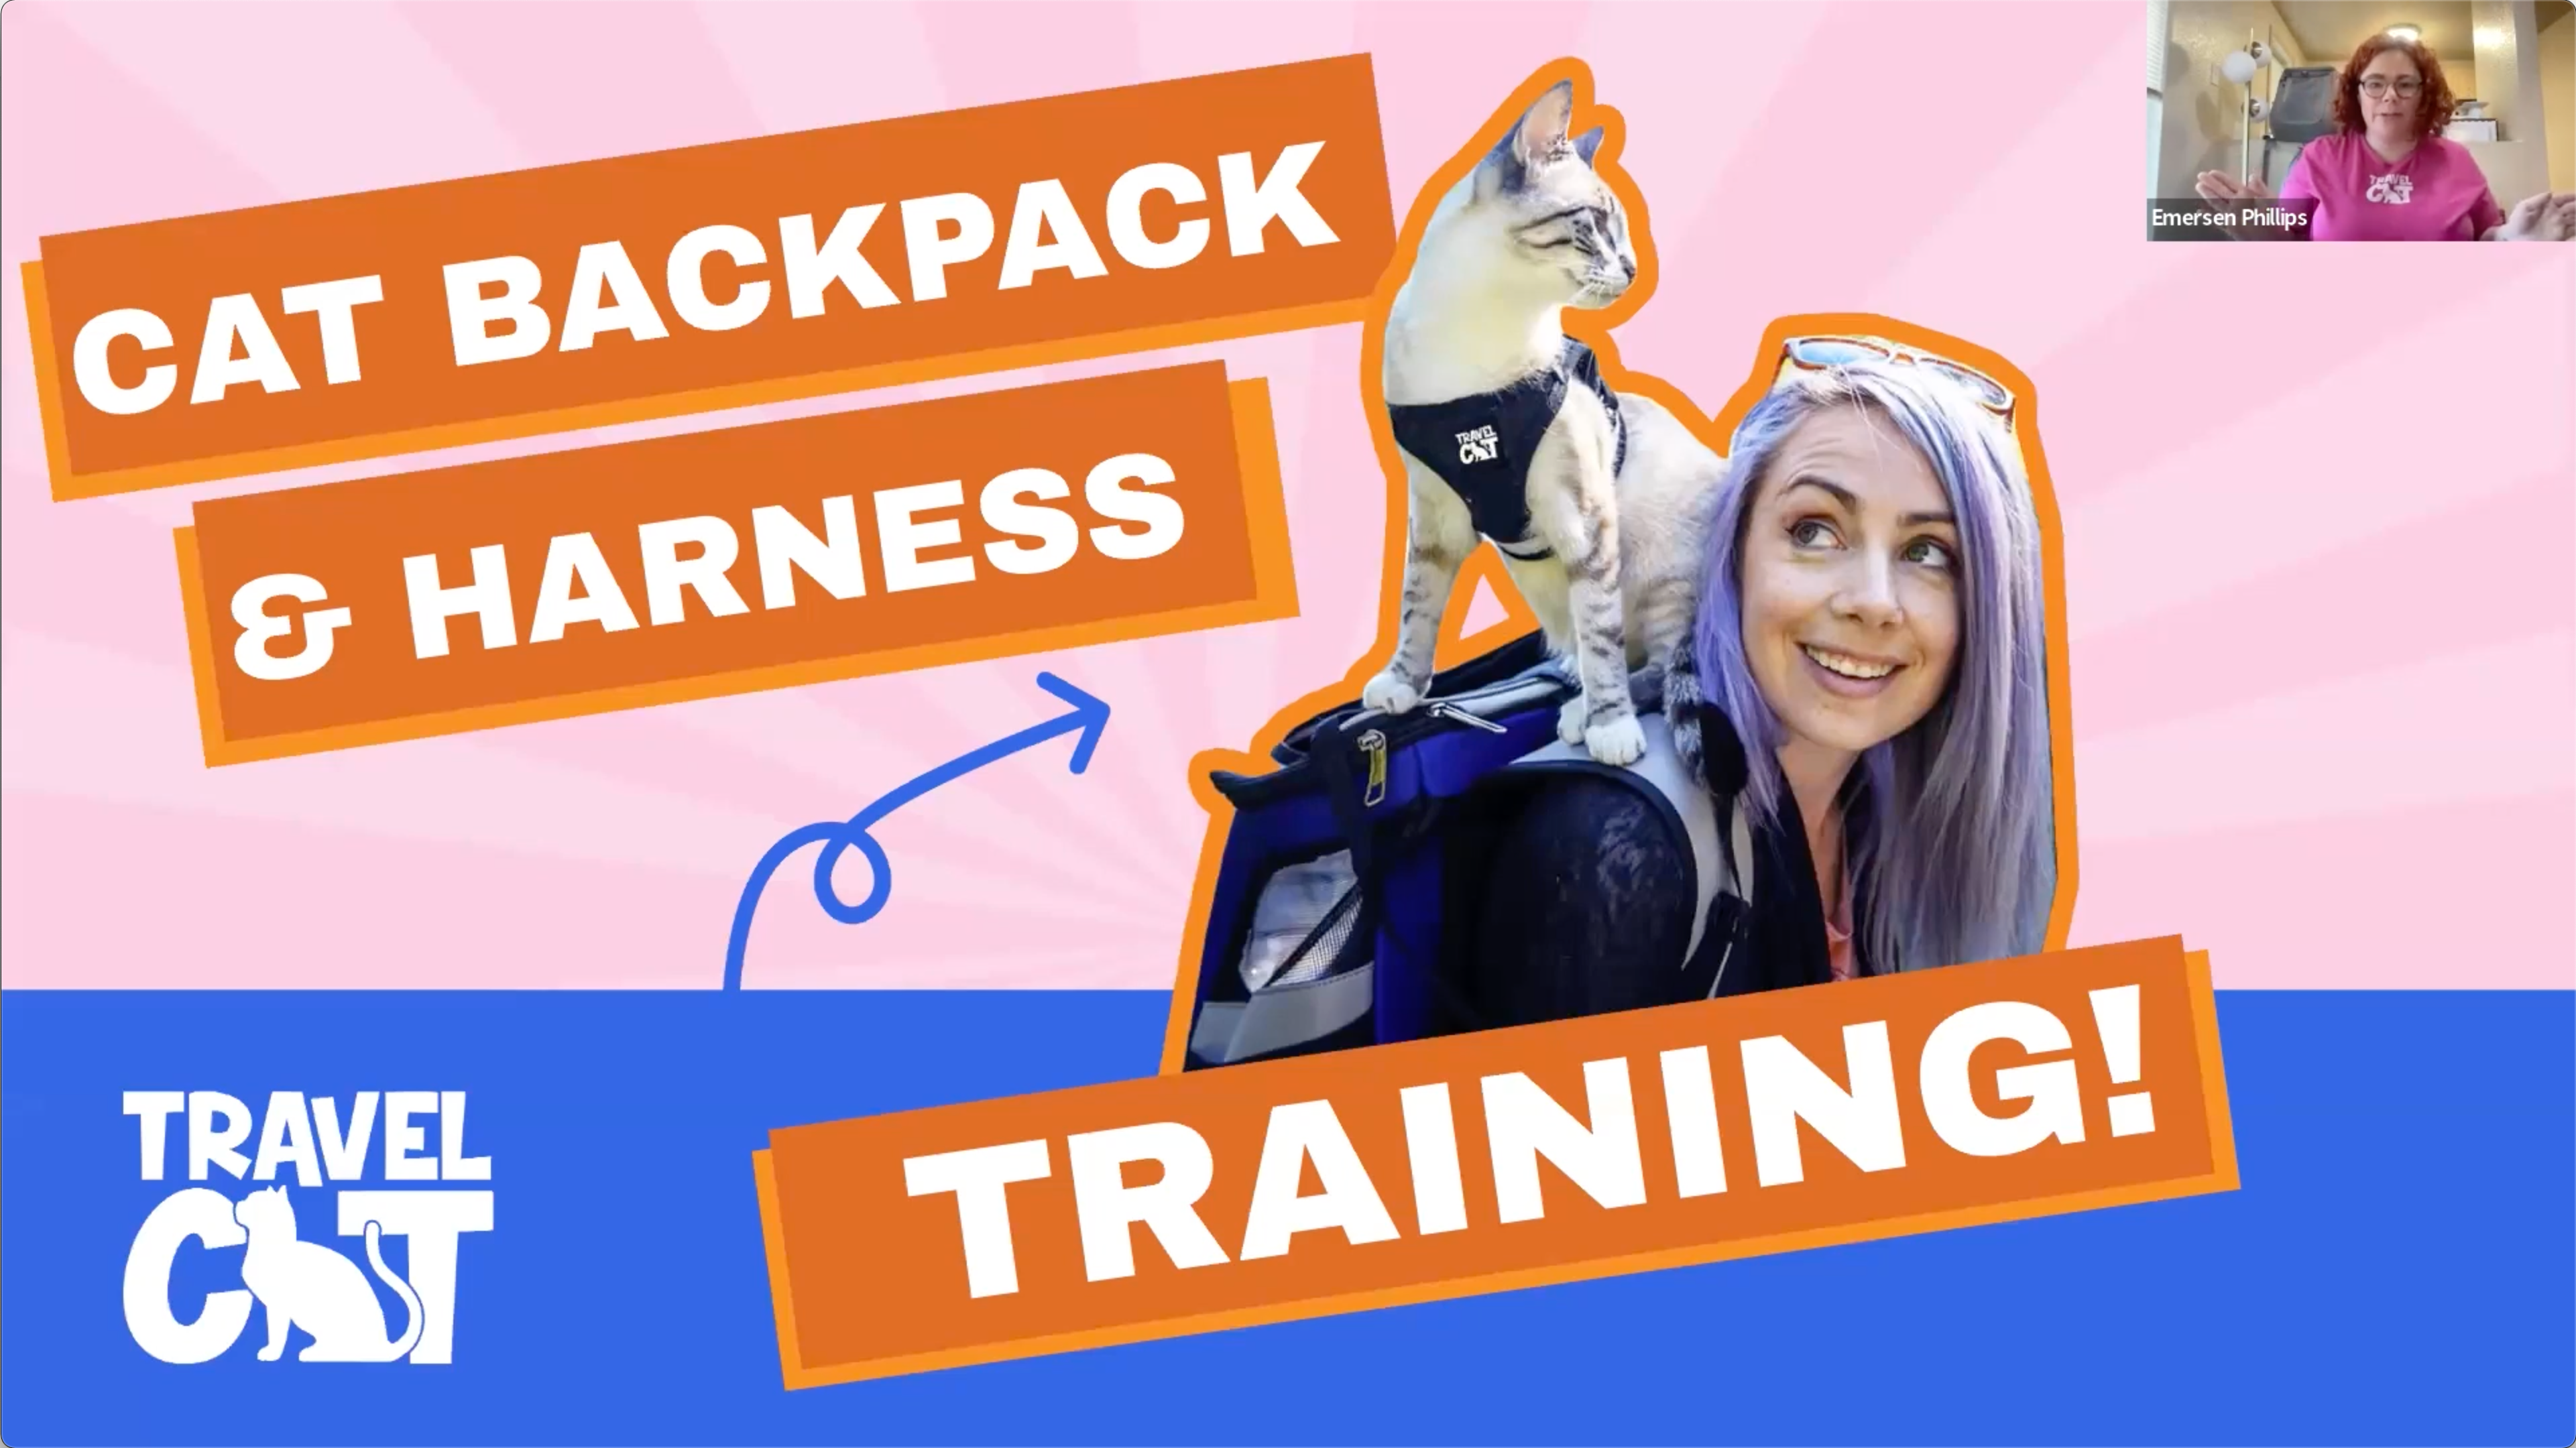 TIPS for Harness and Backpack TRAINING CATS at the Travel Cat Summit